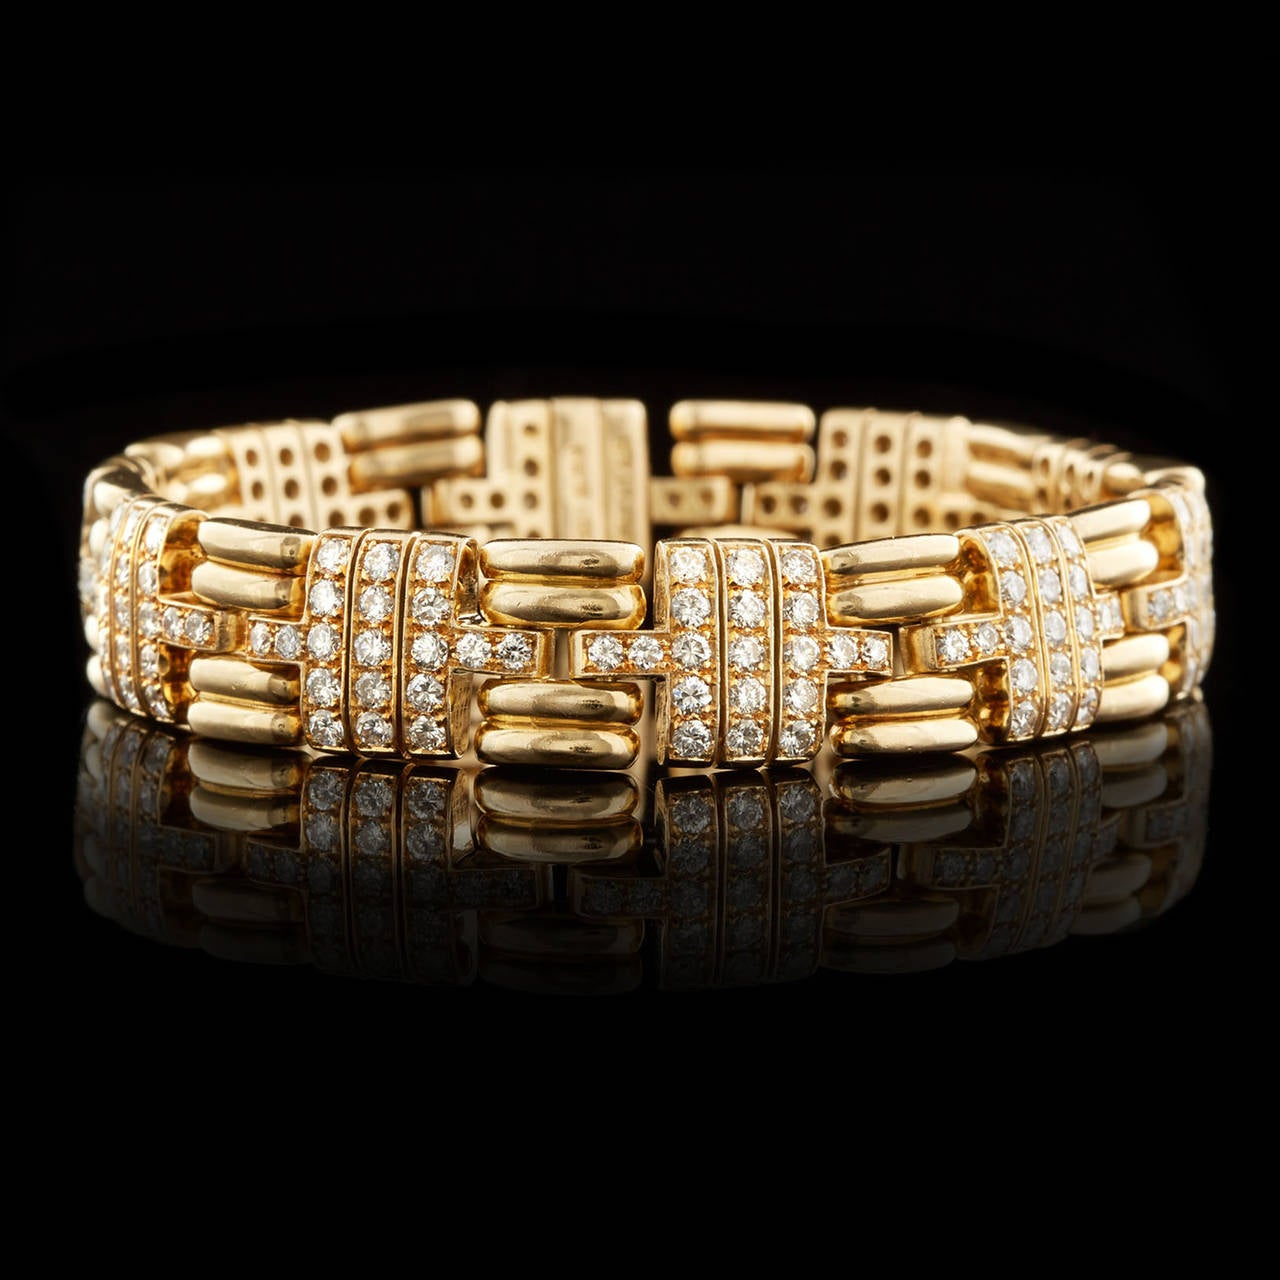 Bulgari Diamond Link Bracelet set in 18Kt Yellow Gold. This bracelet is designed with 190 round brilliant cut F-G color VS quality diamonds totaling approximately 5.70 carats. The bracelet measures 11mm wide and 6.75 inches long. Total item weight